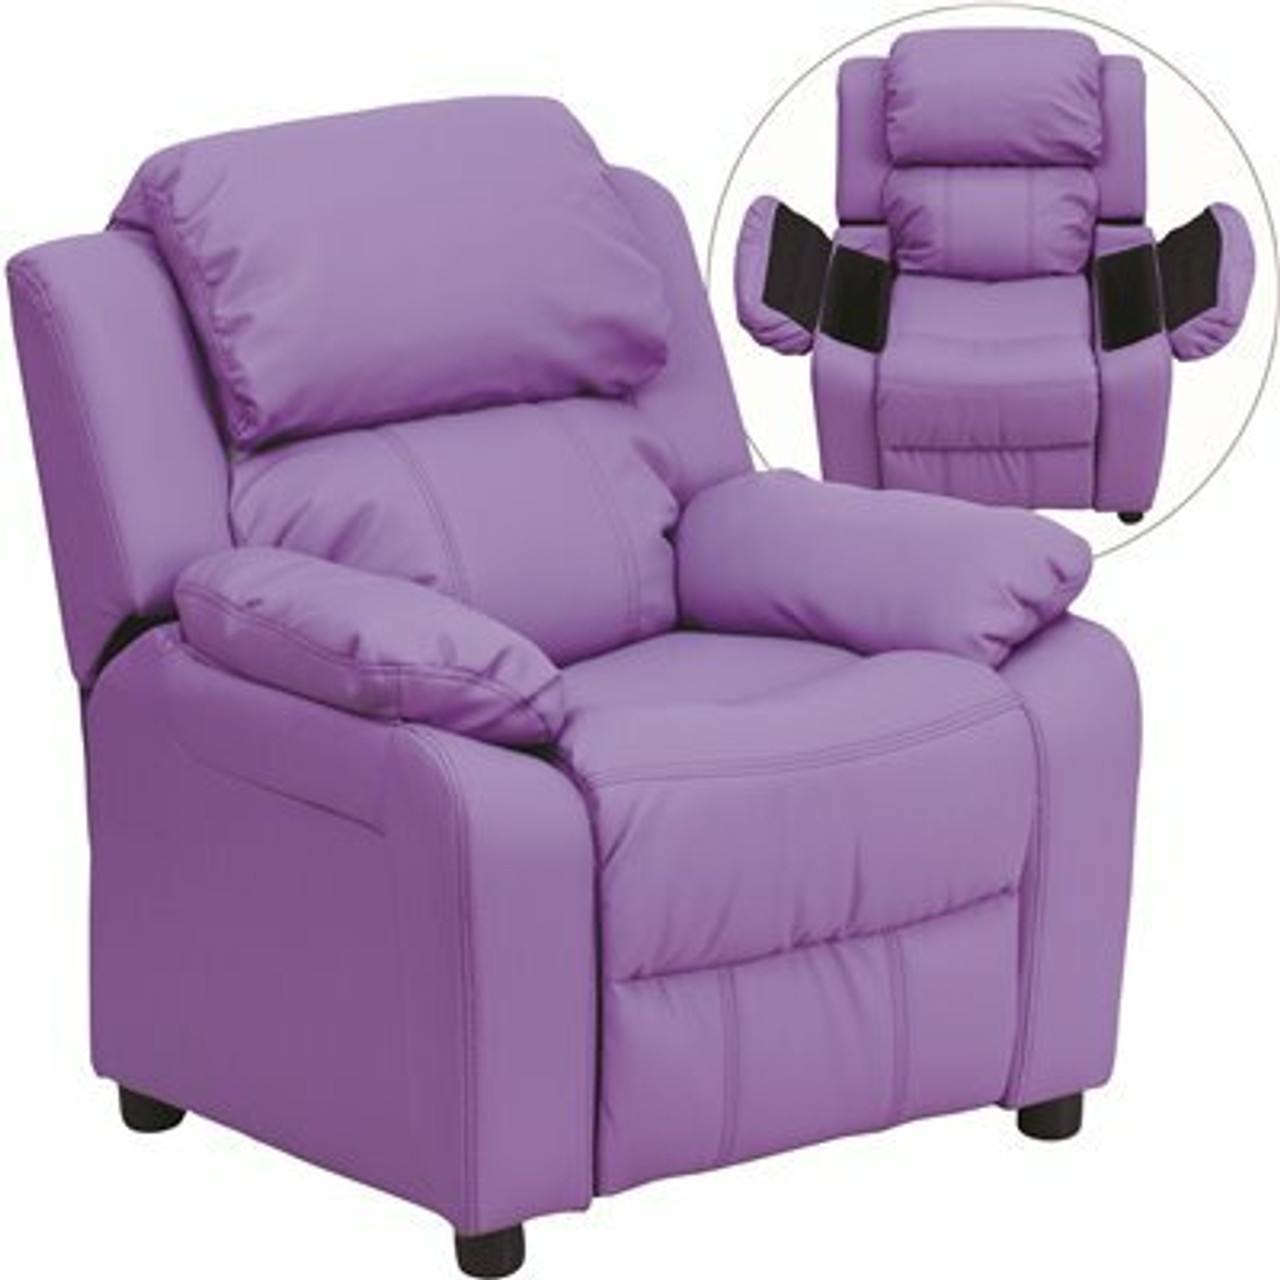 Flash Furniture Deluxe Padded Contemporary Lavender Vinyl Kids Recliner With Storage Arms